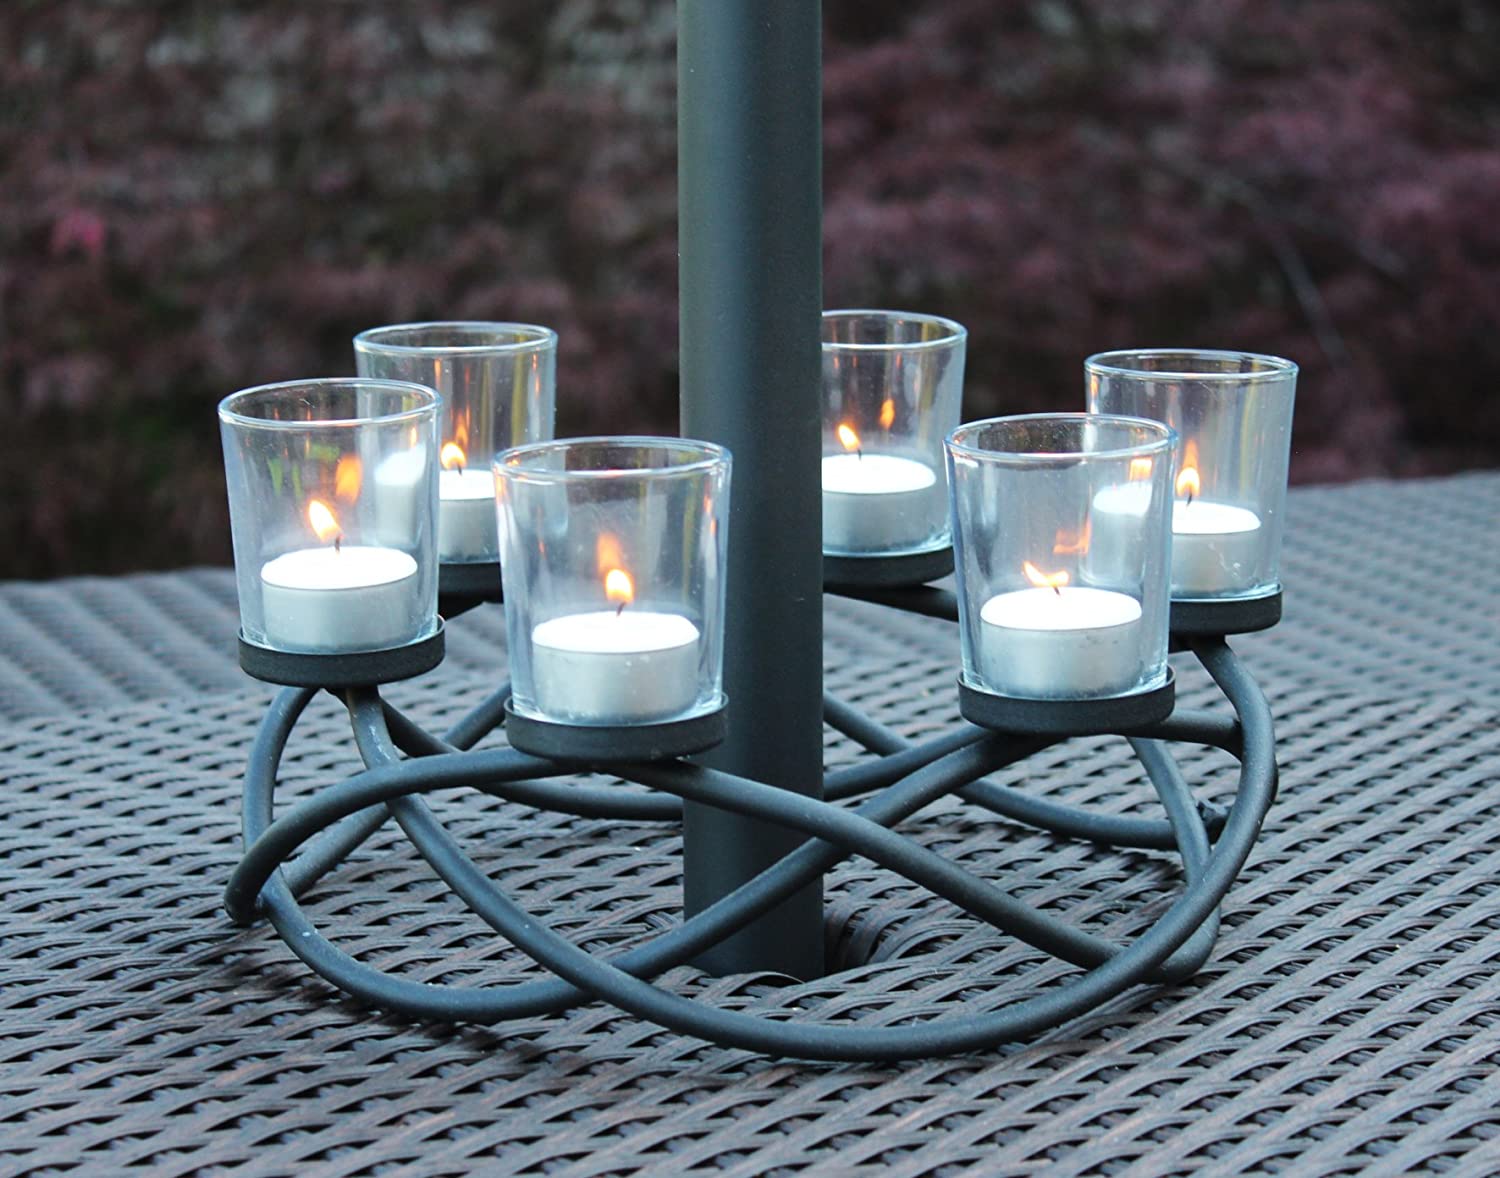 Our favourite garden table centrepiece ideas | Seraphic Metal Candle Holders